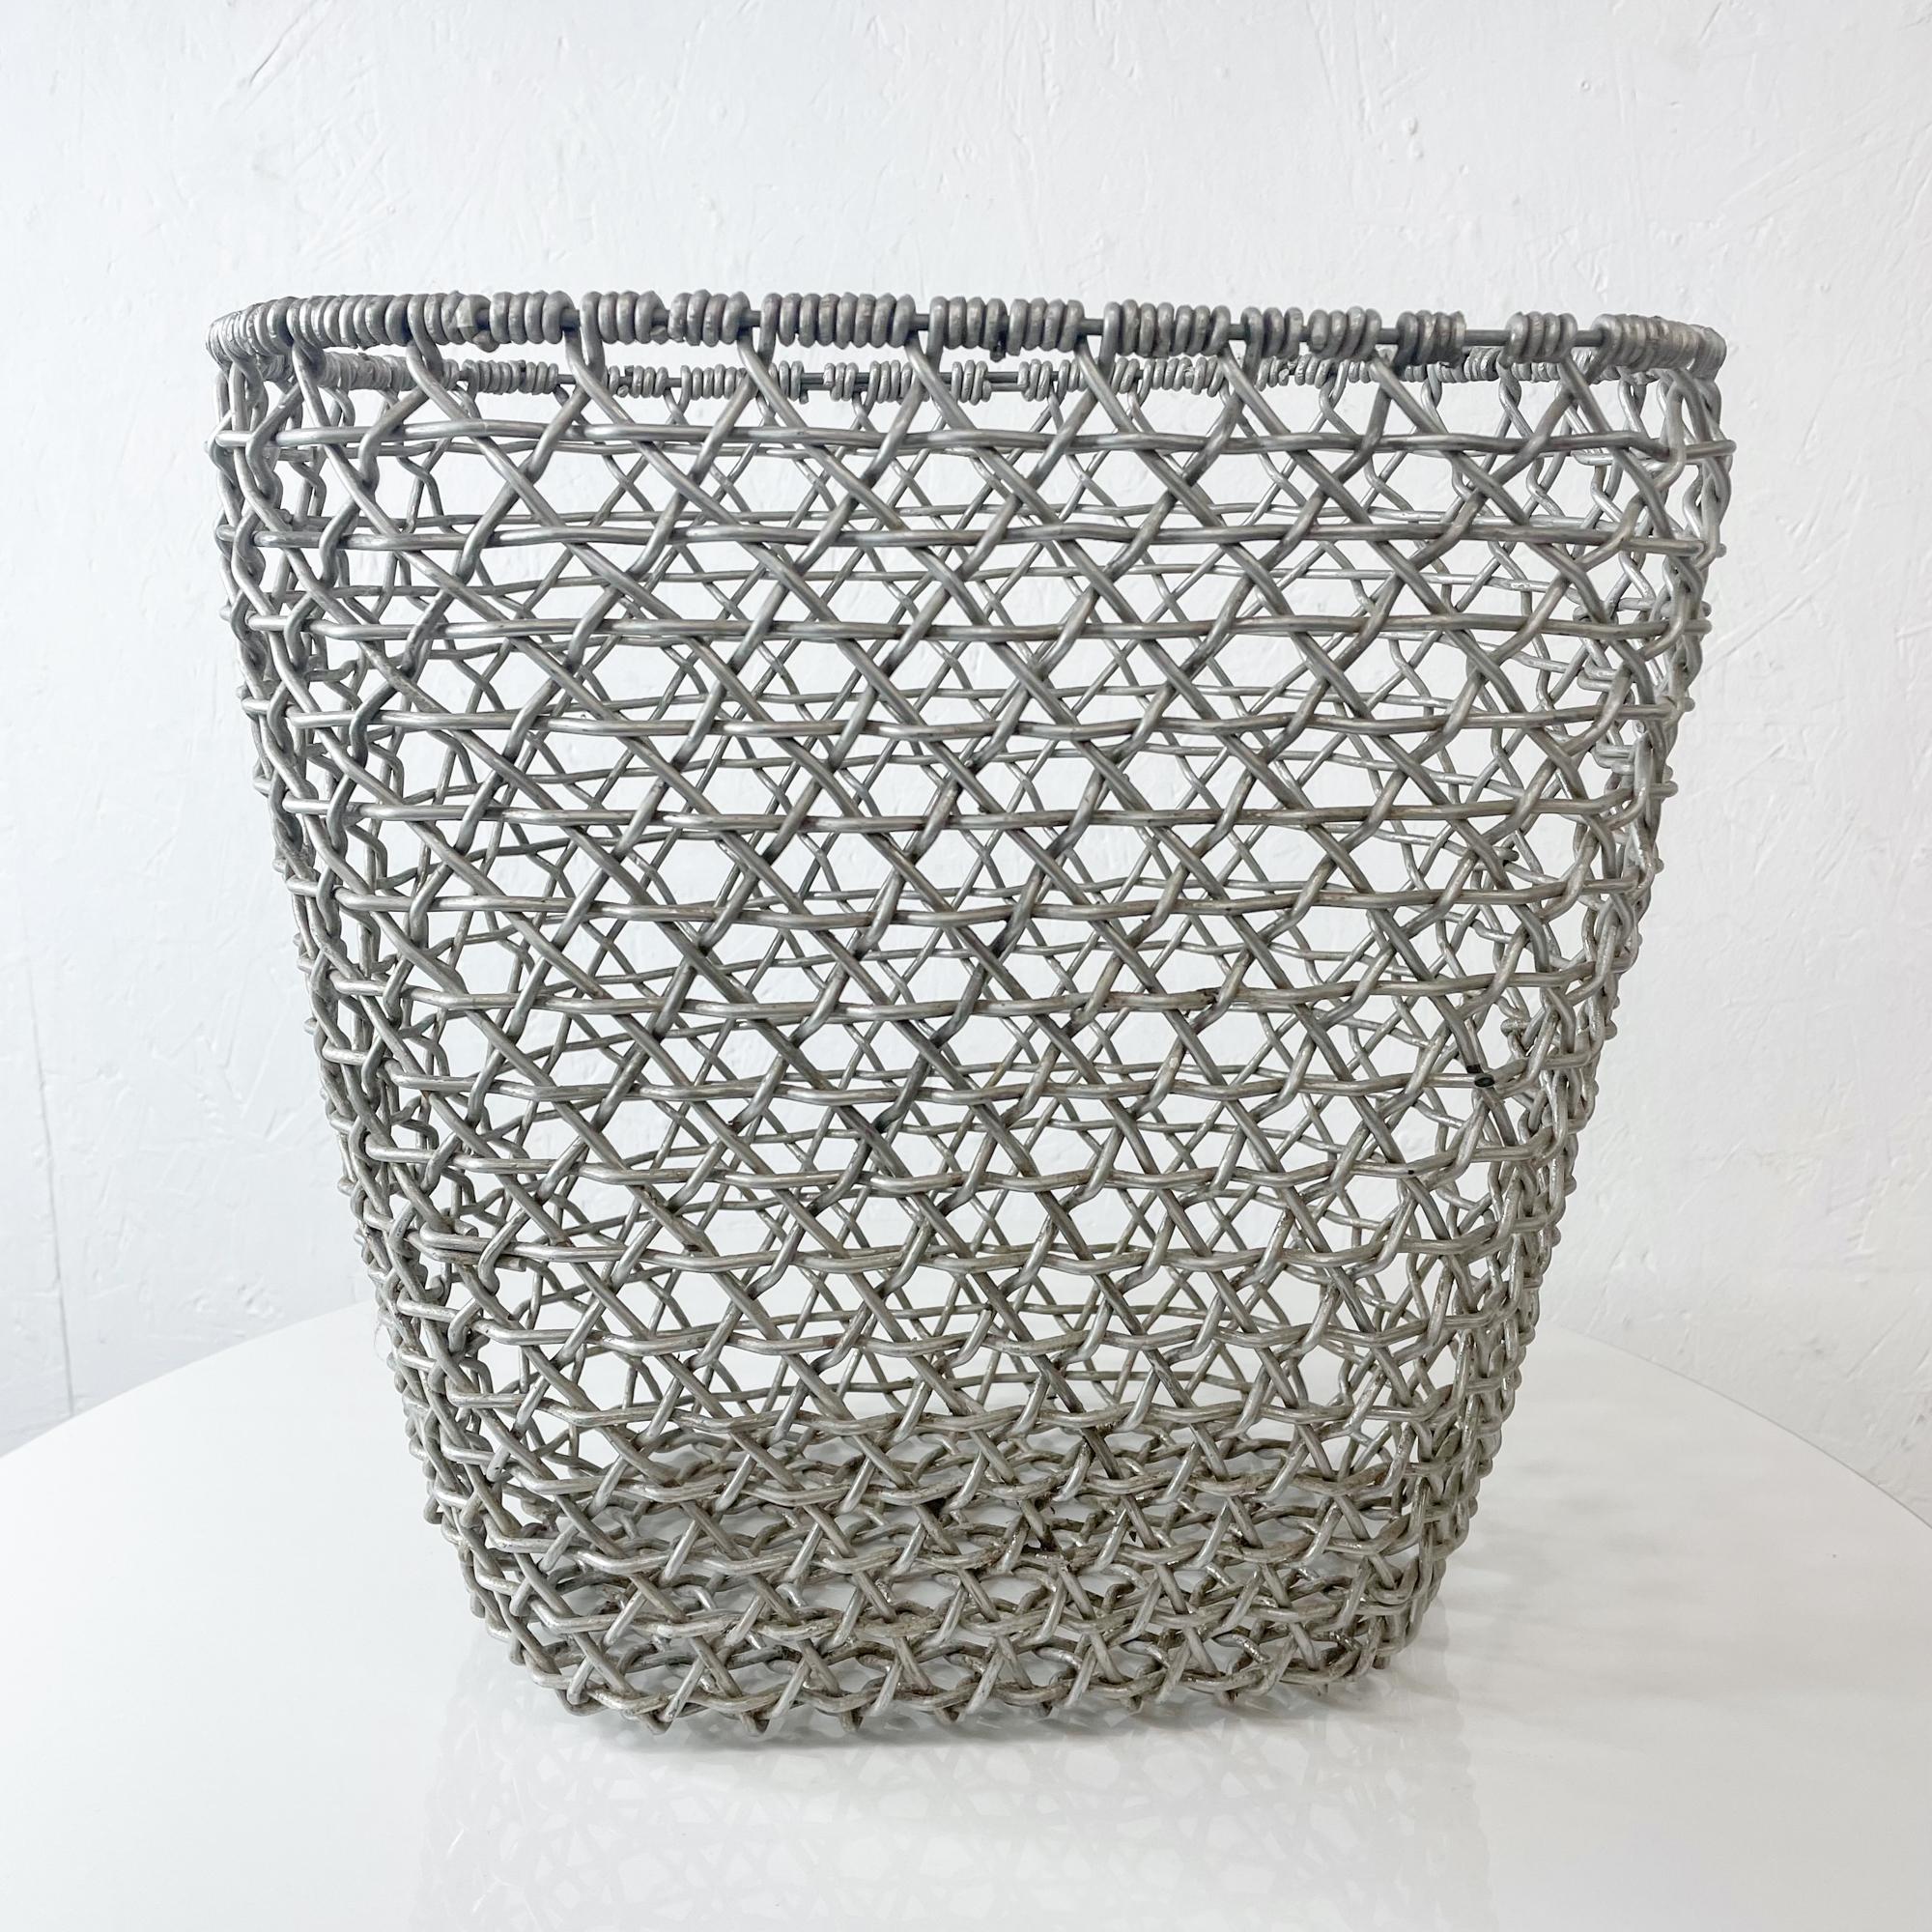 Basket
Vintage woven Aluminum Wire basket, Open grid. Open container.
No label present.
Original vintage preowned unrestored condition. Presents firm and sturdy. No damage. 
12.75 H x 13.25 W x 10.25 D inches
Refer to images.

 